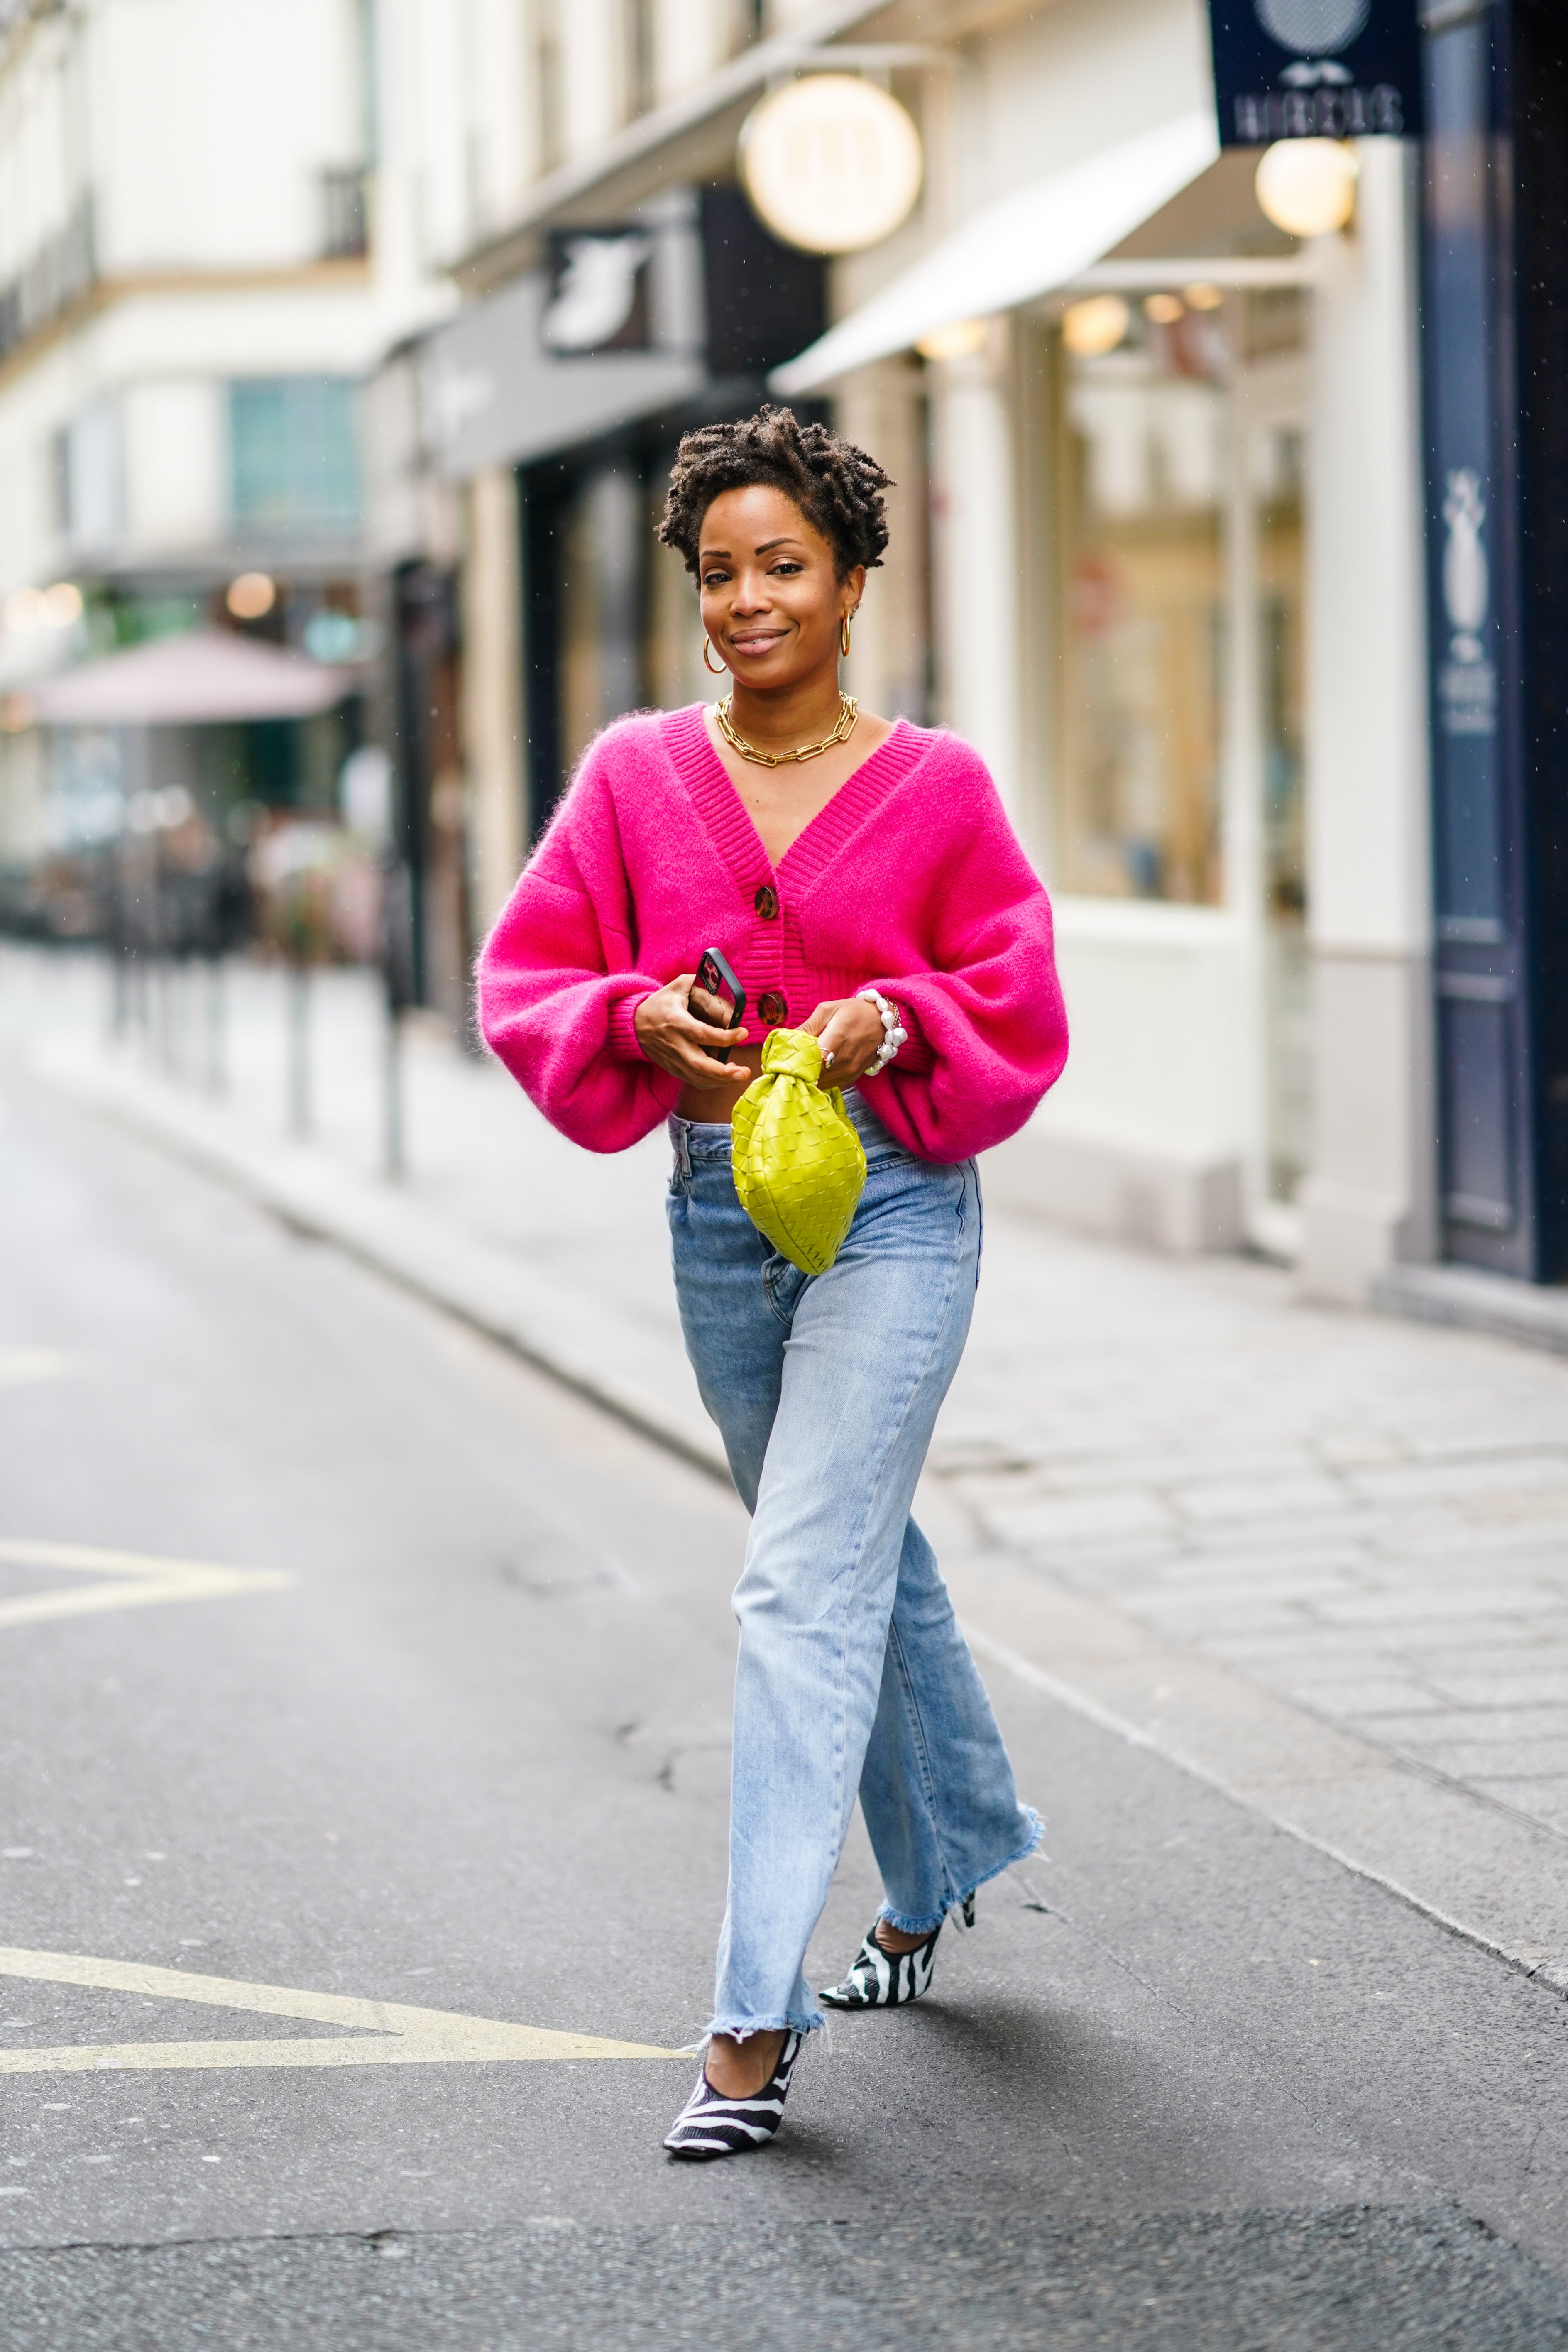 4 Ways to Style Pink Pants · The RELM & Co